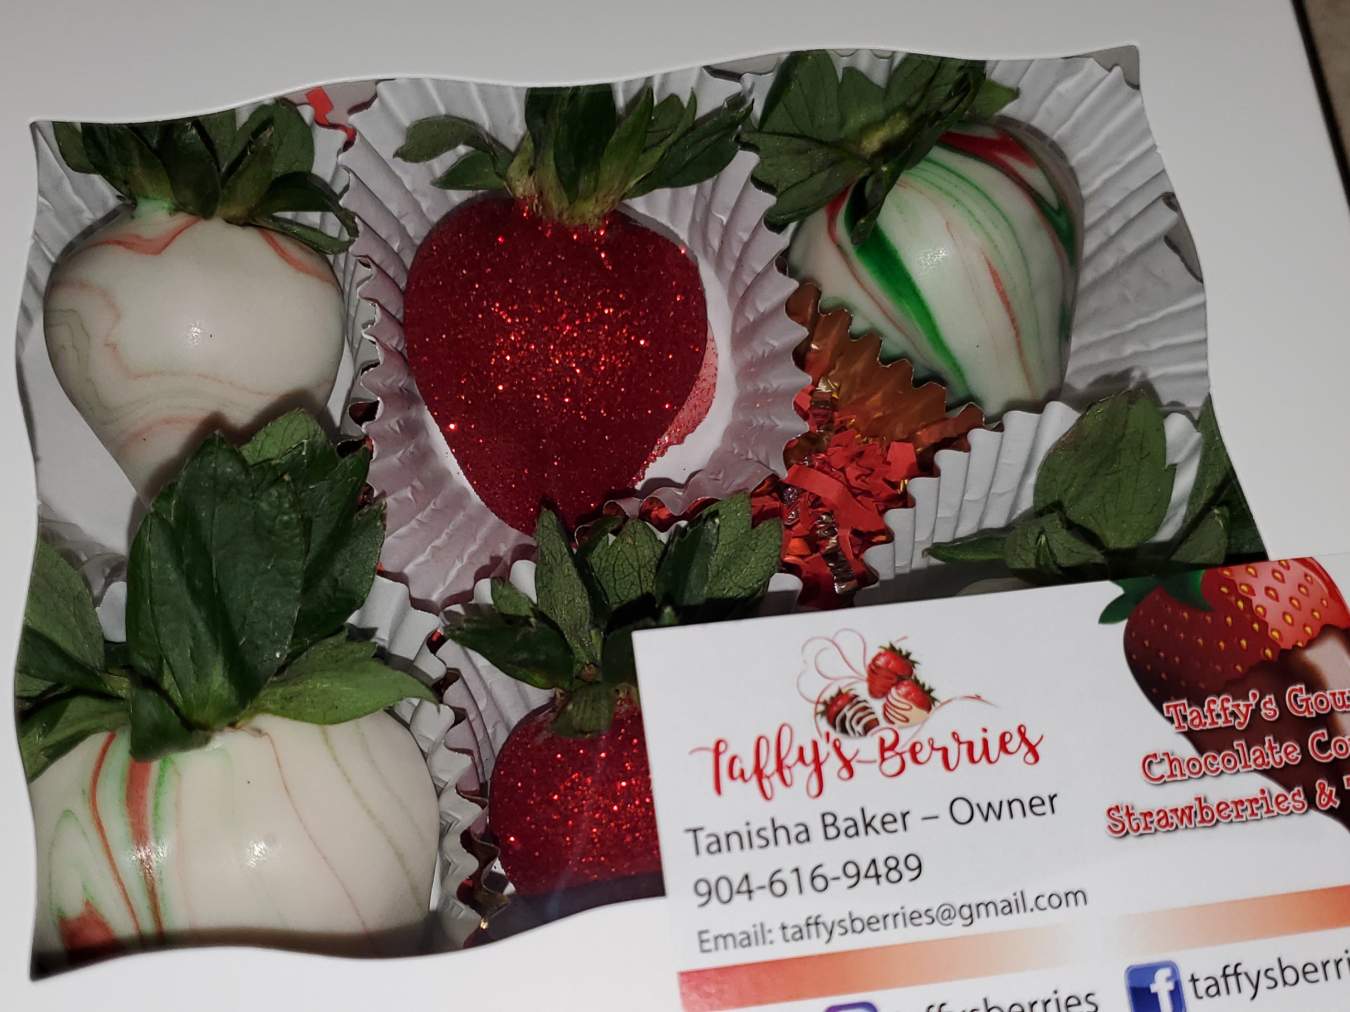 Boxed Strawberries